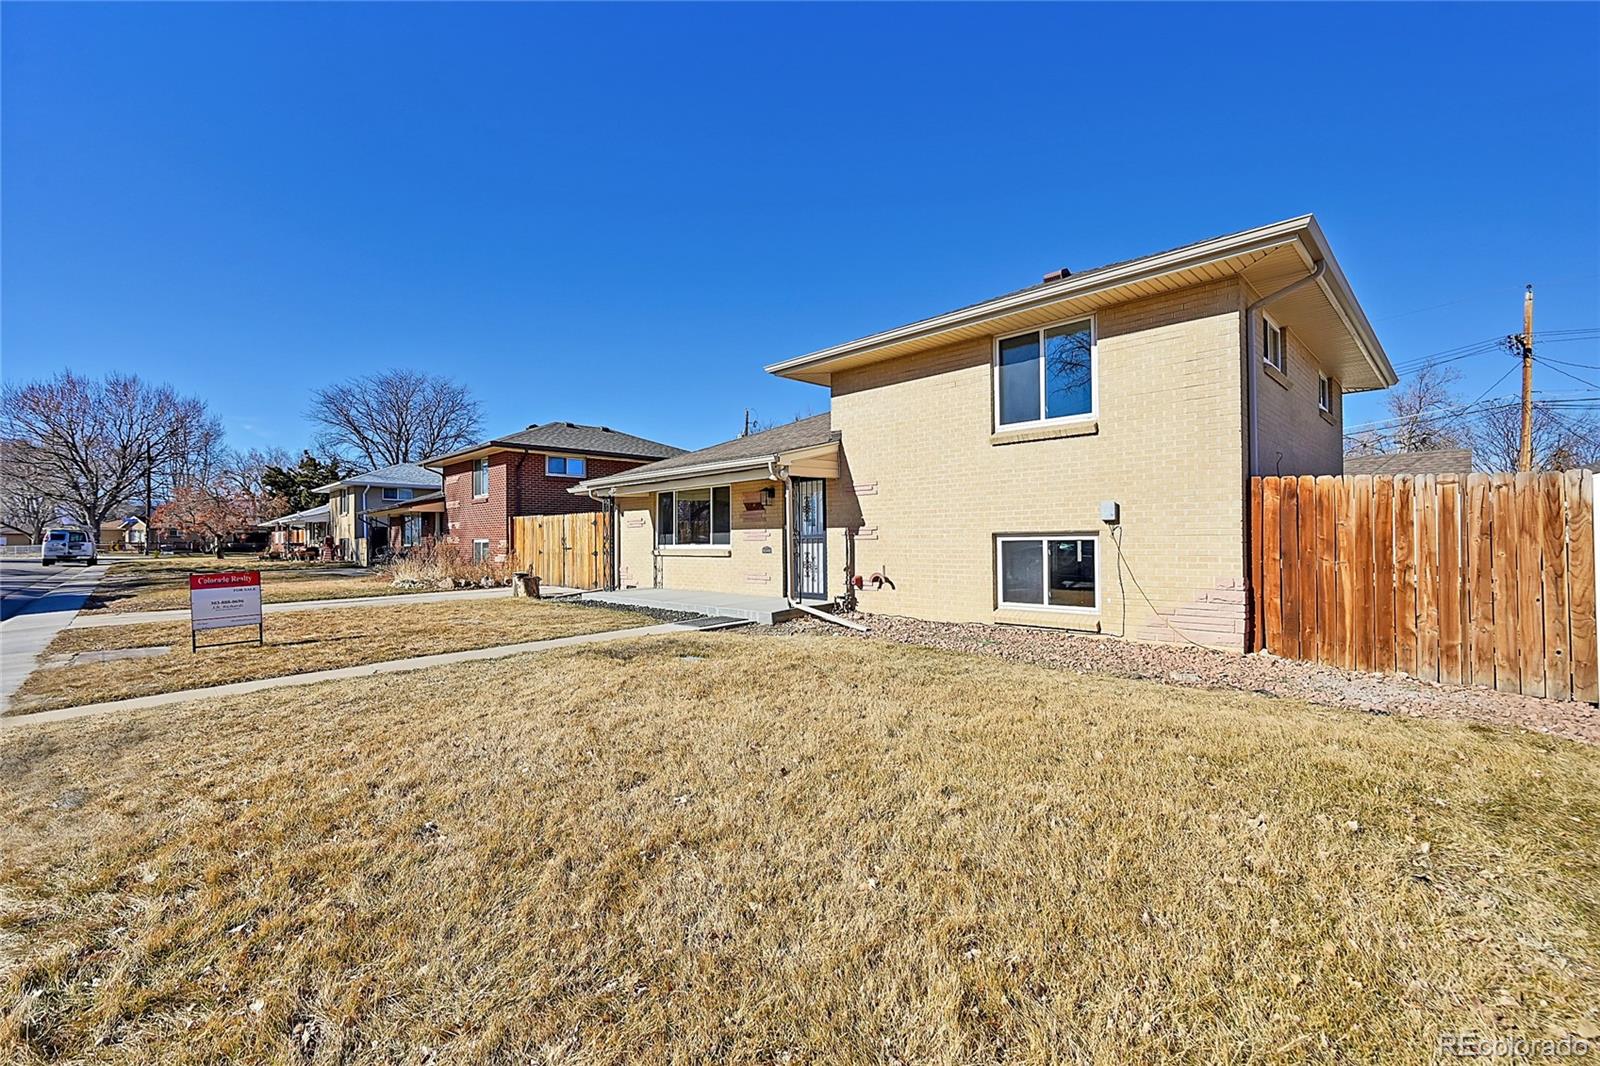 6729  54 avenue, Arvada sold home. Closed on 2024-03-01 for $579,000.